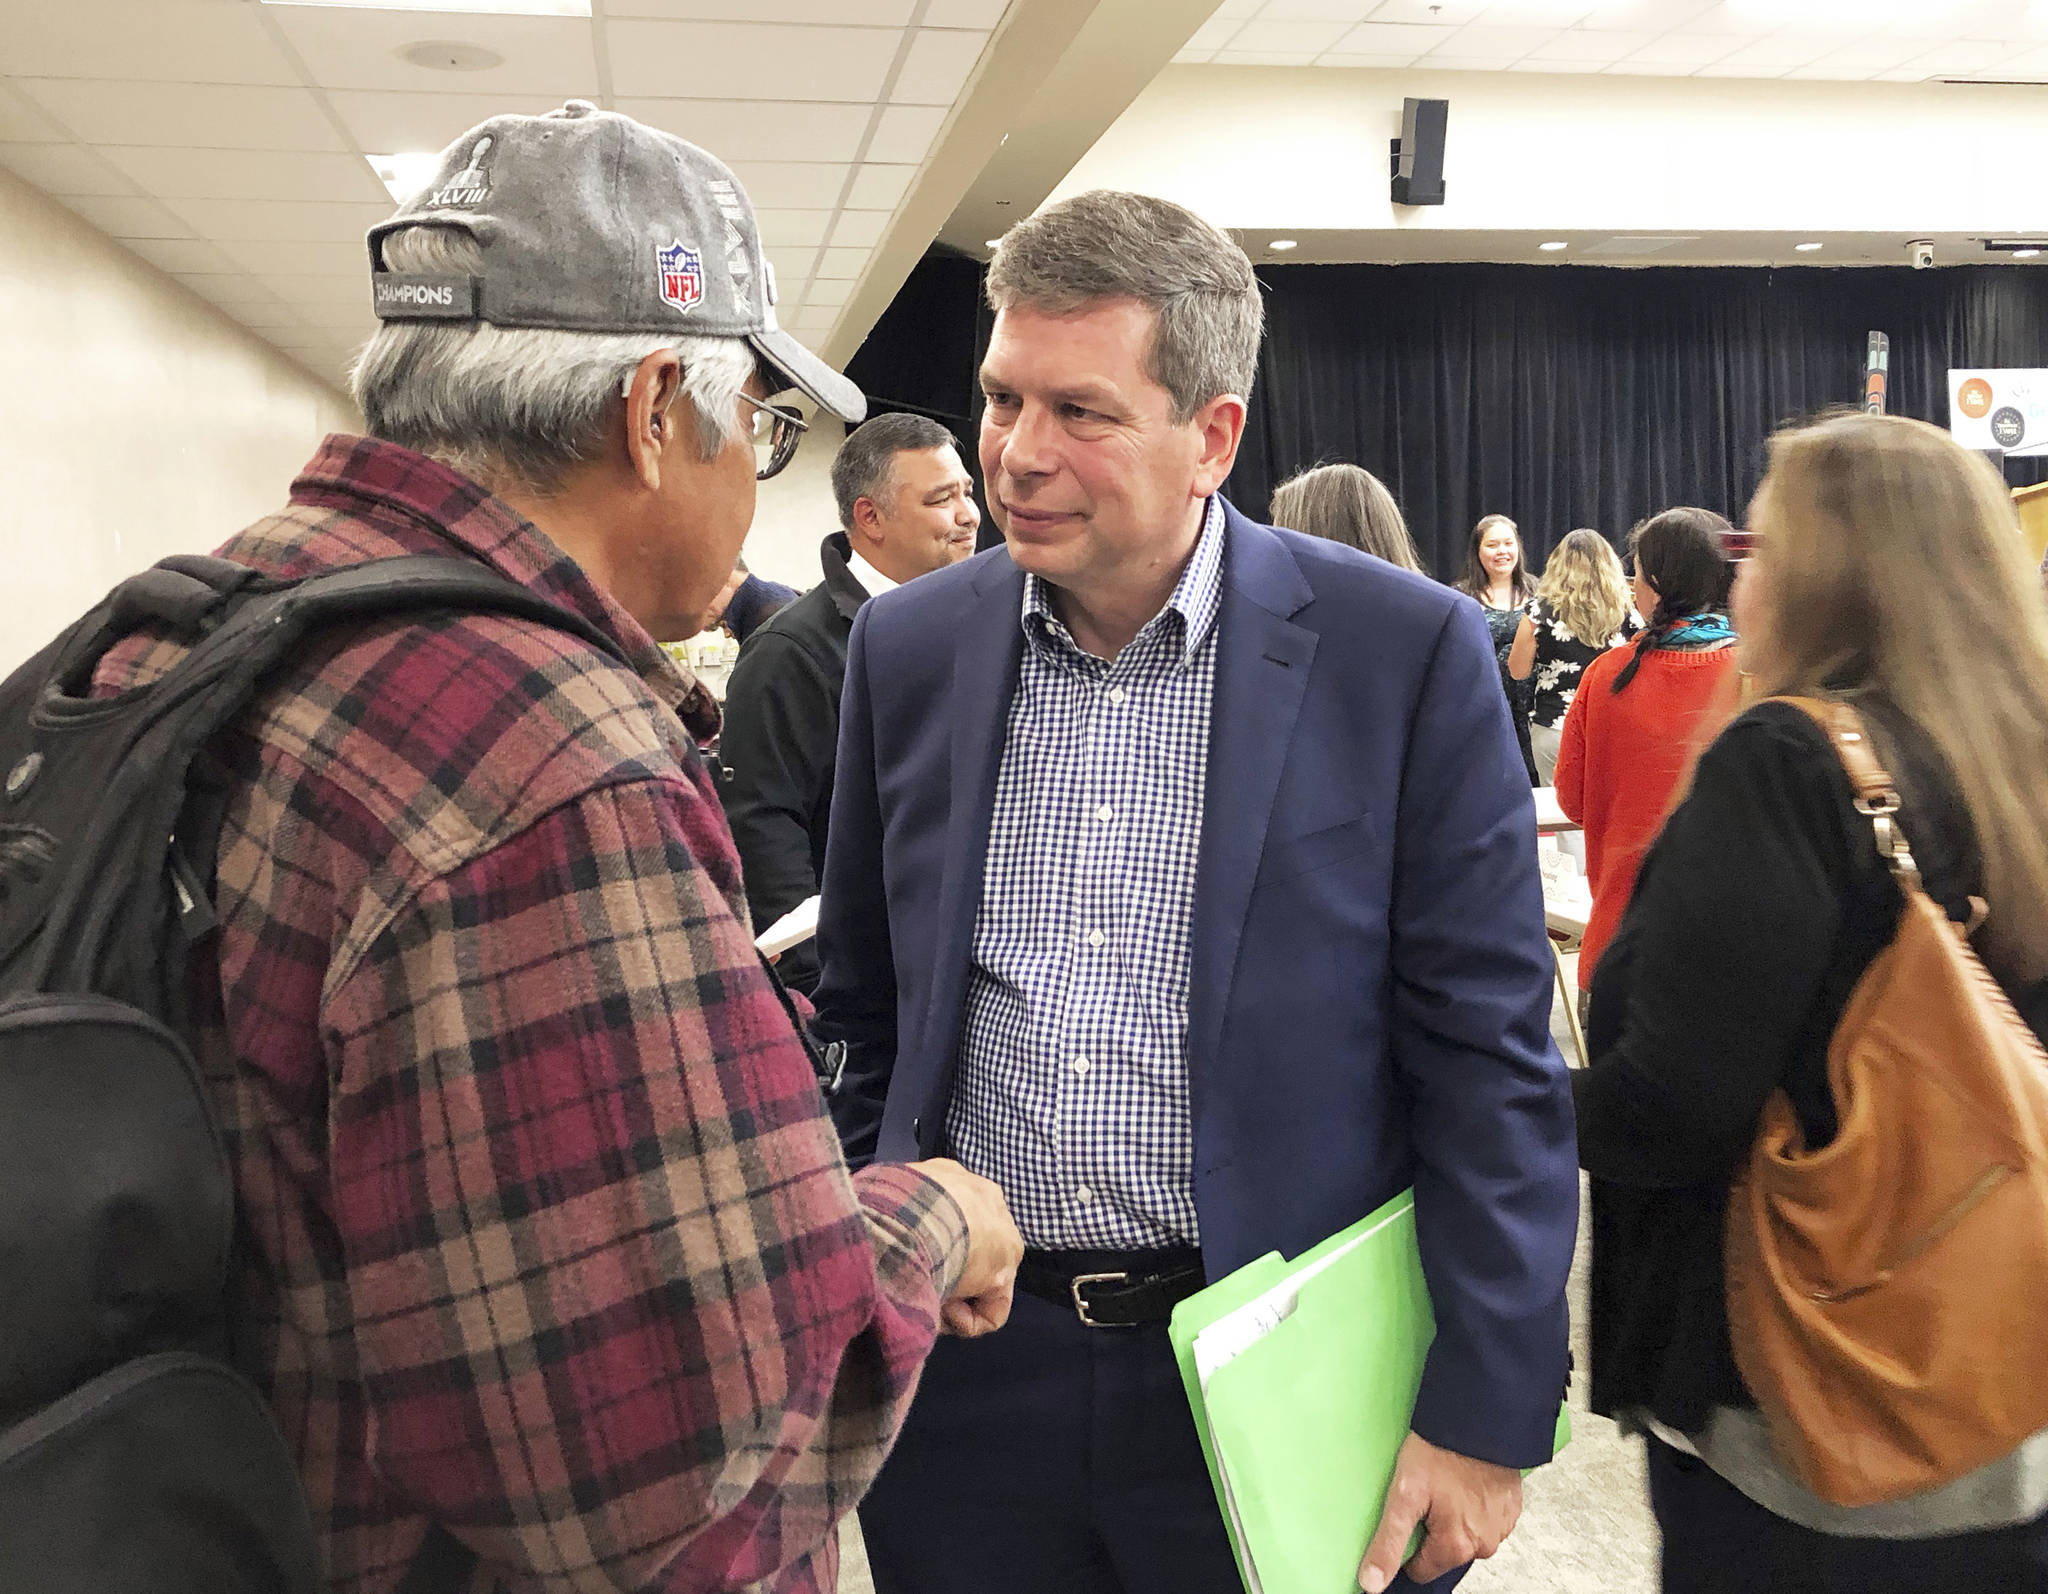 Democratic nominee for governor in Alaska Mark Begich, center, speaks to a man following a candidate forum on Tuesday, Oct. 2, 2018, in Juneau, Alaska. Also attending the forum were Gov. Bill Walker, an independent, and Libertarian Billy Toien. (AP Photo/Becky Bohrer)